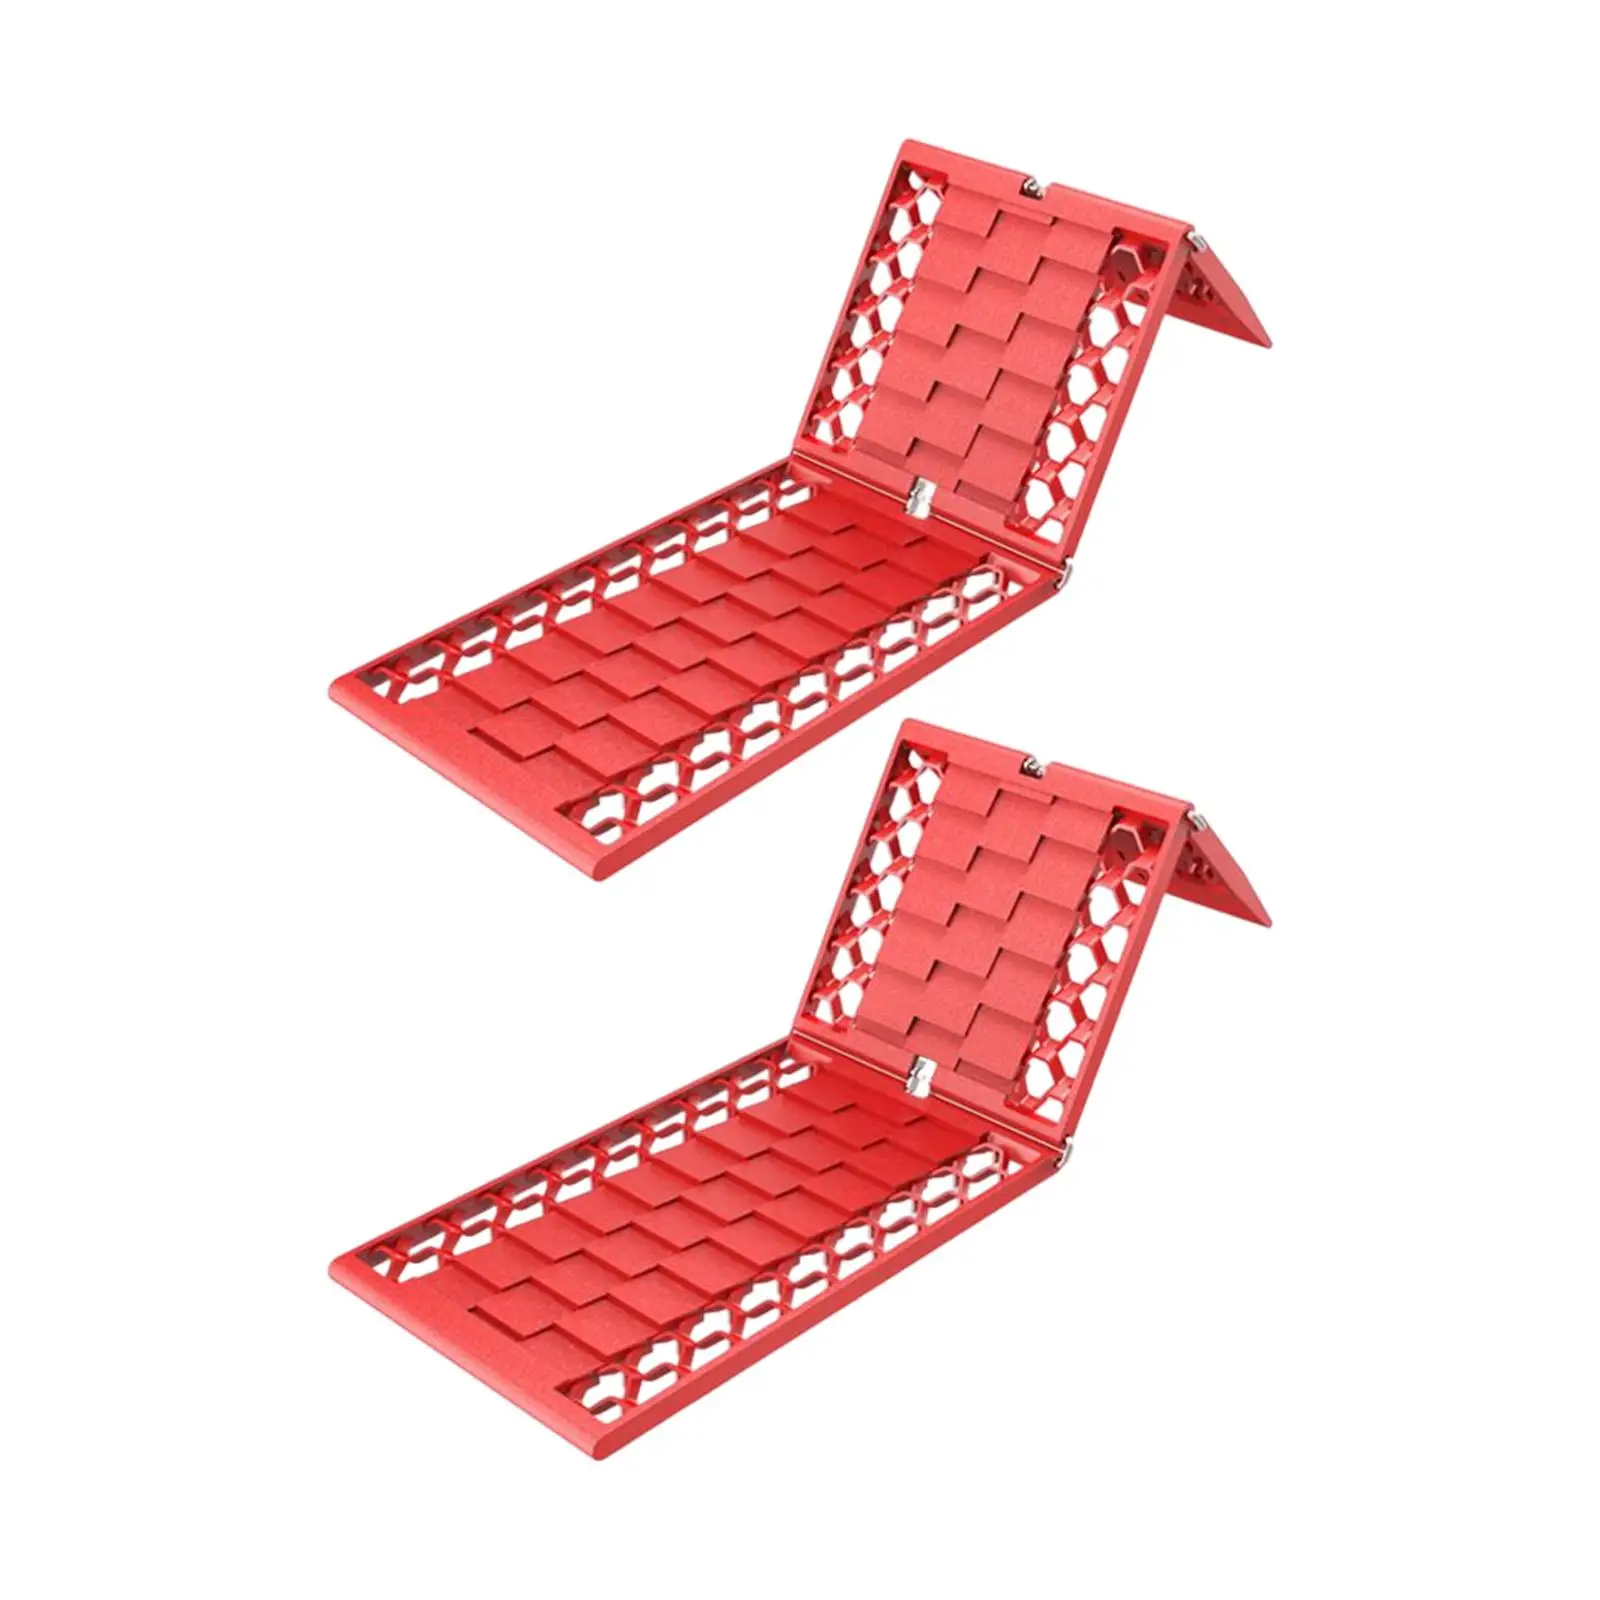 2Pcs off roading traction track Nonslip Plate Snow Escape Devices for Ice